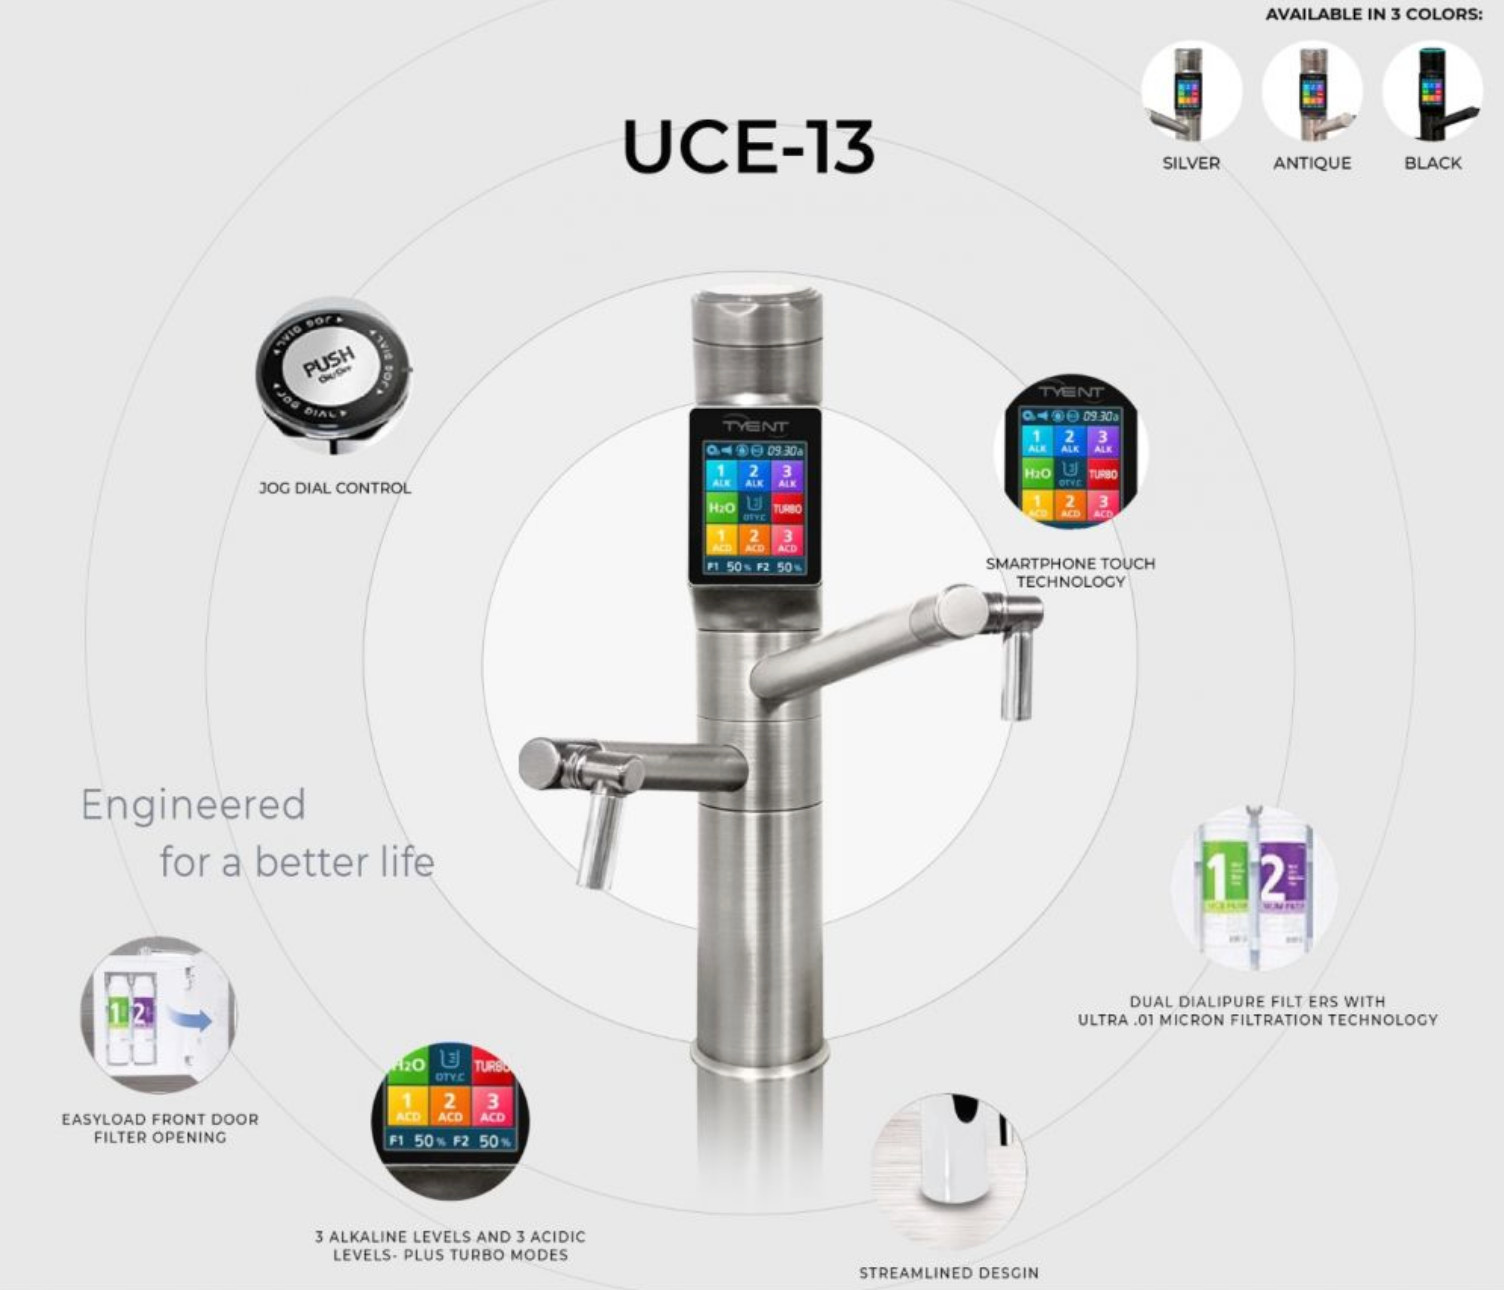 tyent uce-13 water ionizer overview